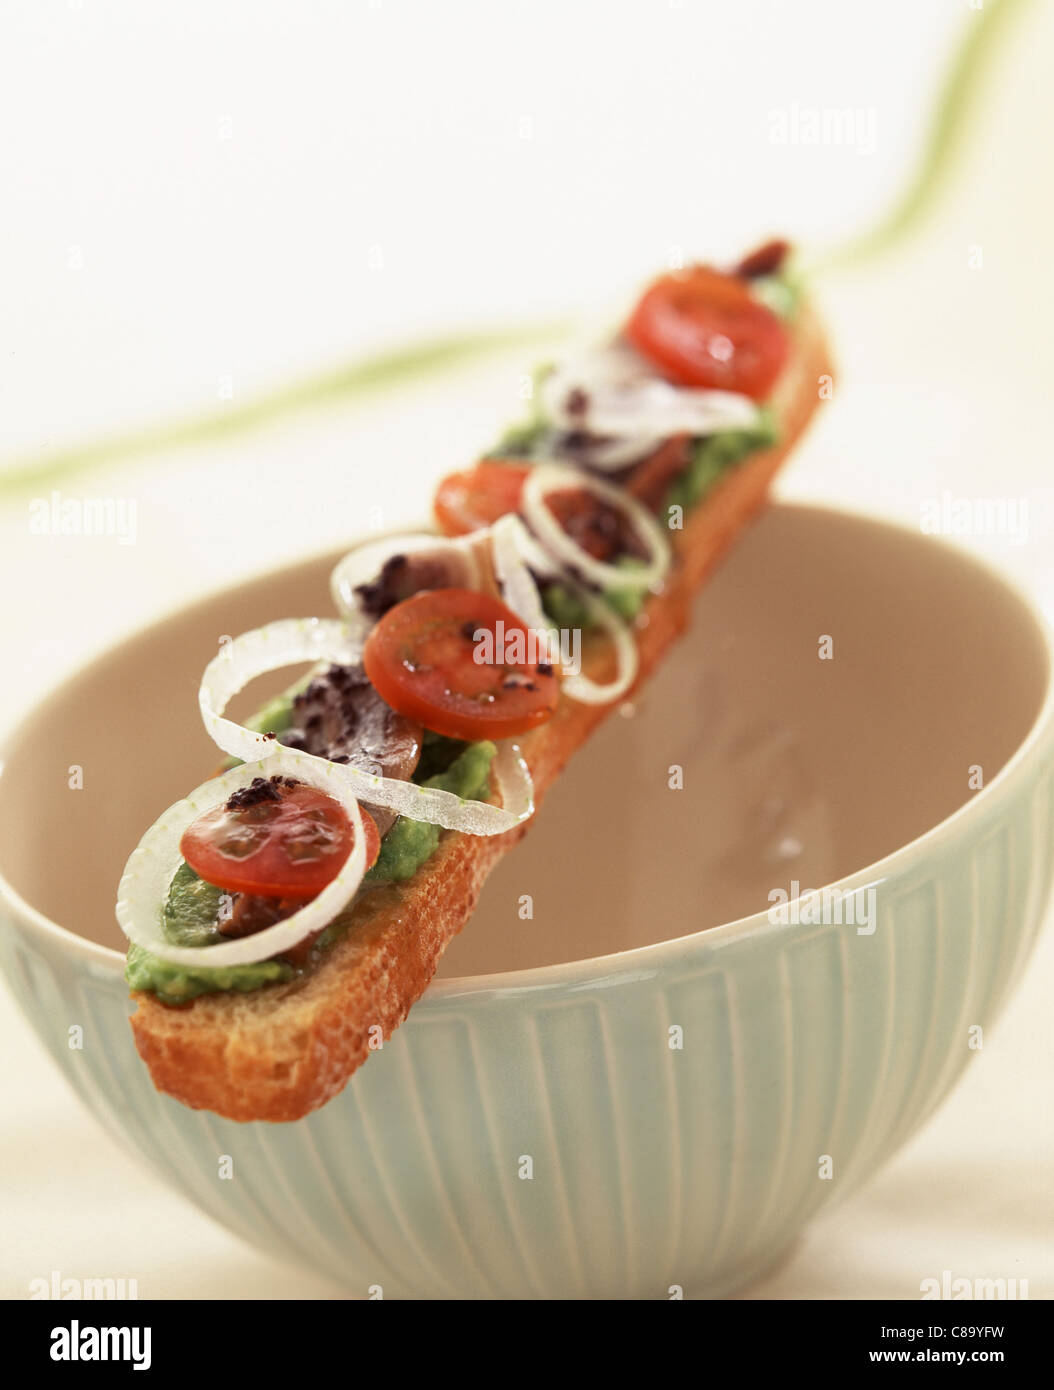 Long open sandwich with avocado, tomato and onion rings Stock Photo